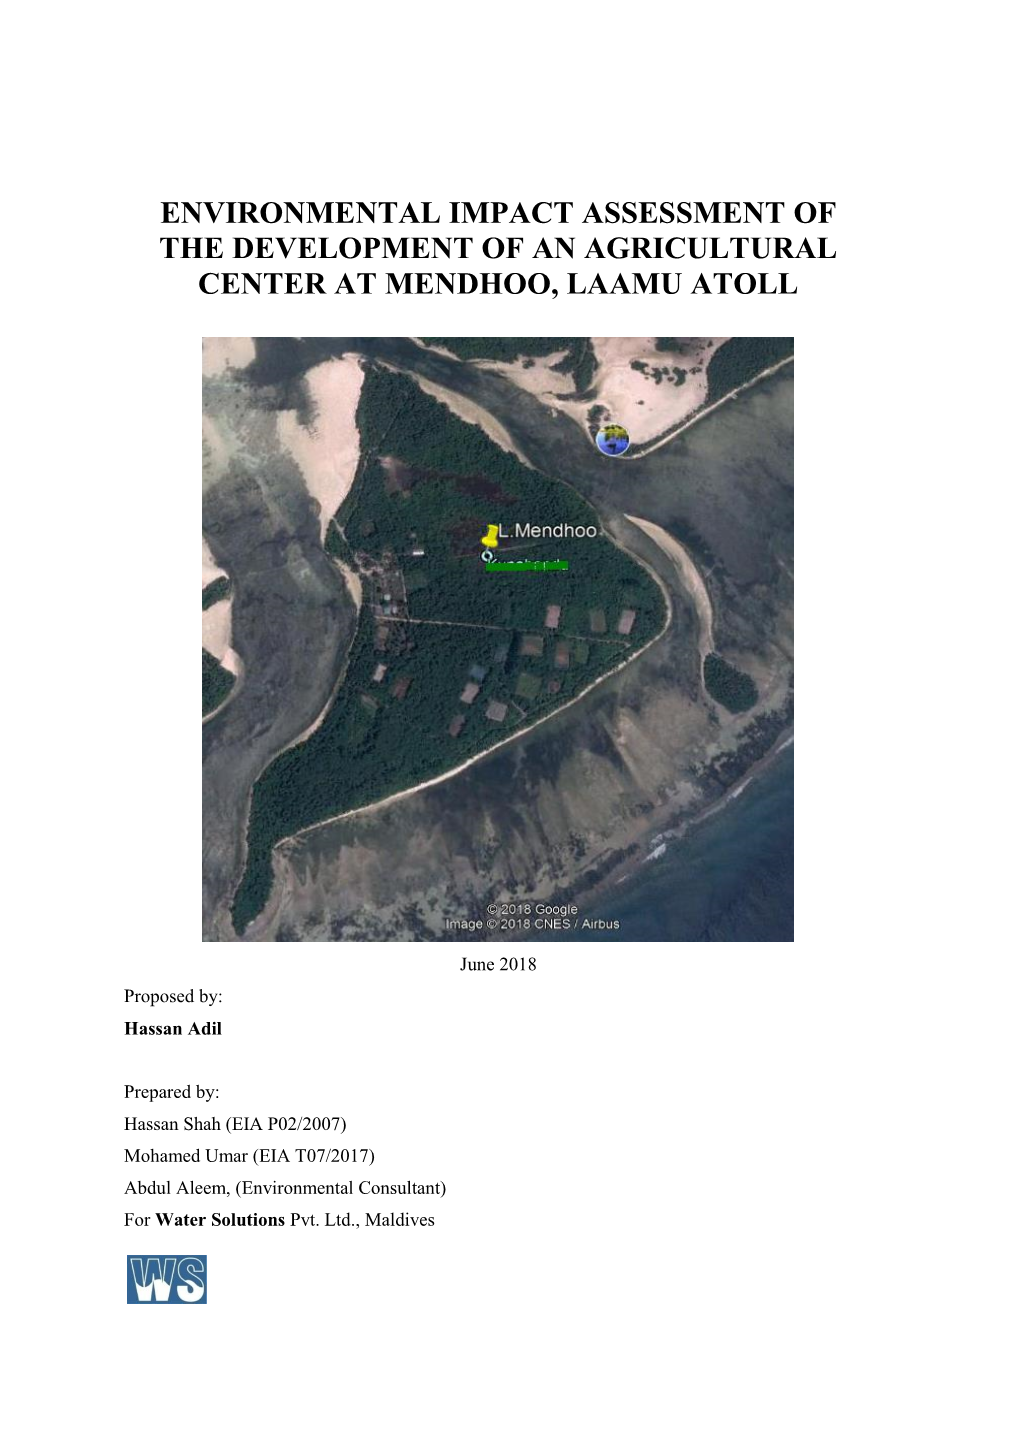 Environmental Impact Assessment of the Development of an Agricultural Center at Mendhoo, Laamu Atoll